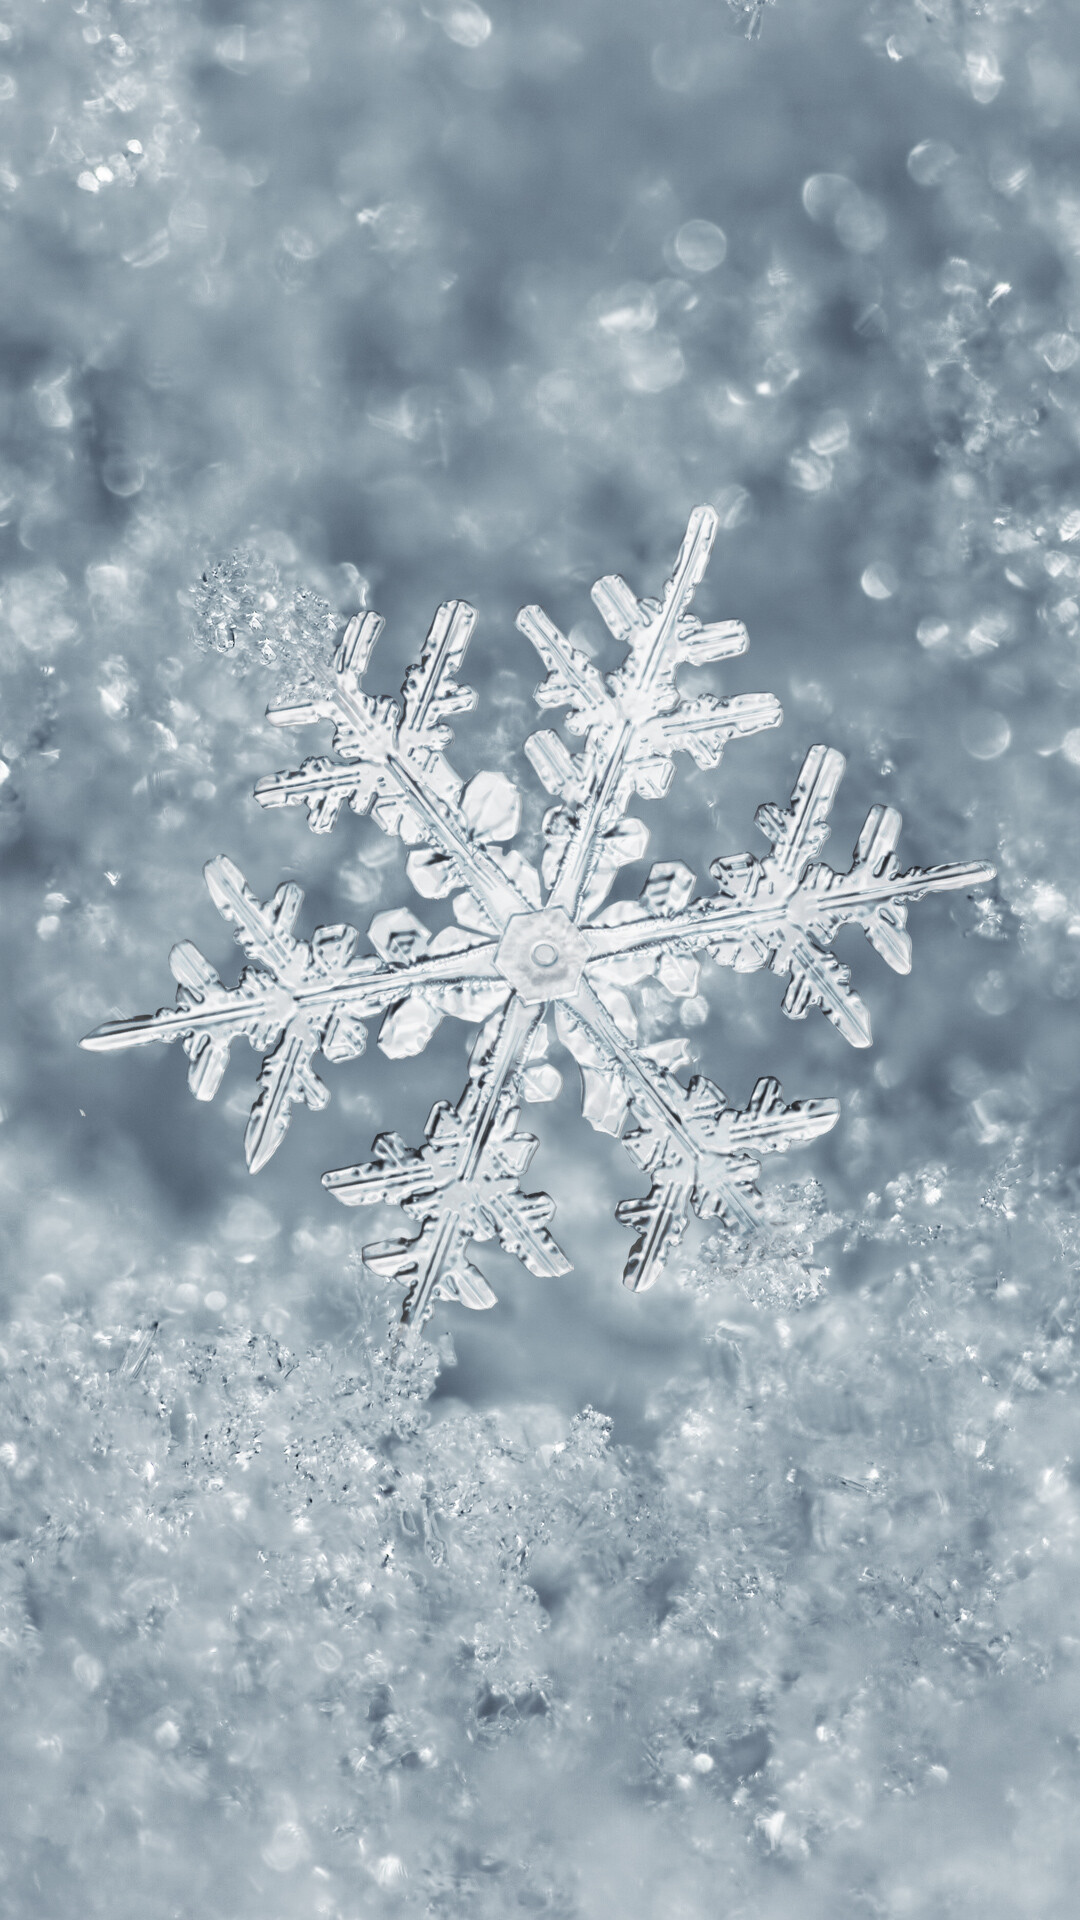 Winter: Snowflake, Deposit of ice crystals on objects. 1080x1920 Full HD Wallpaper.